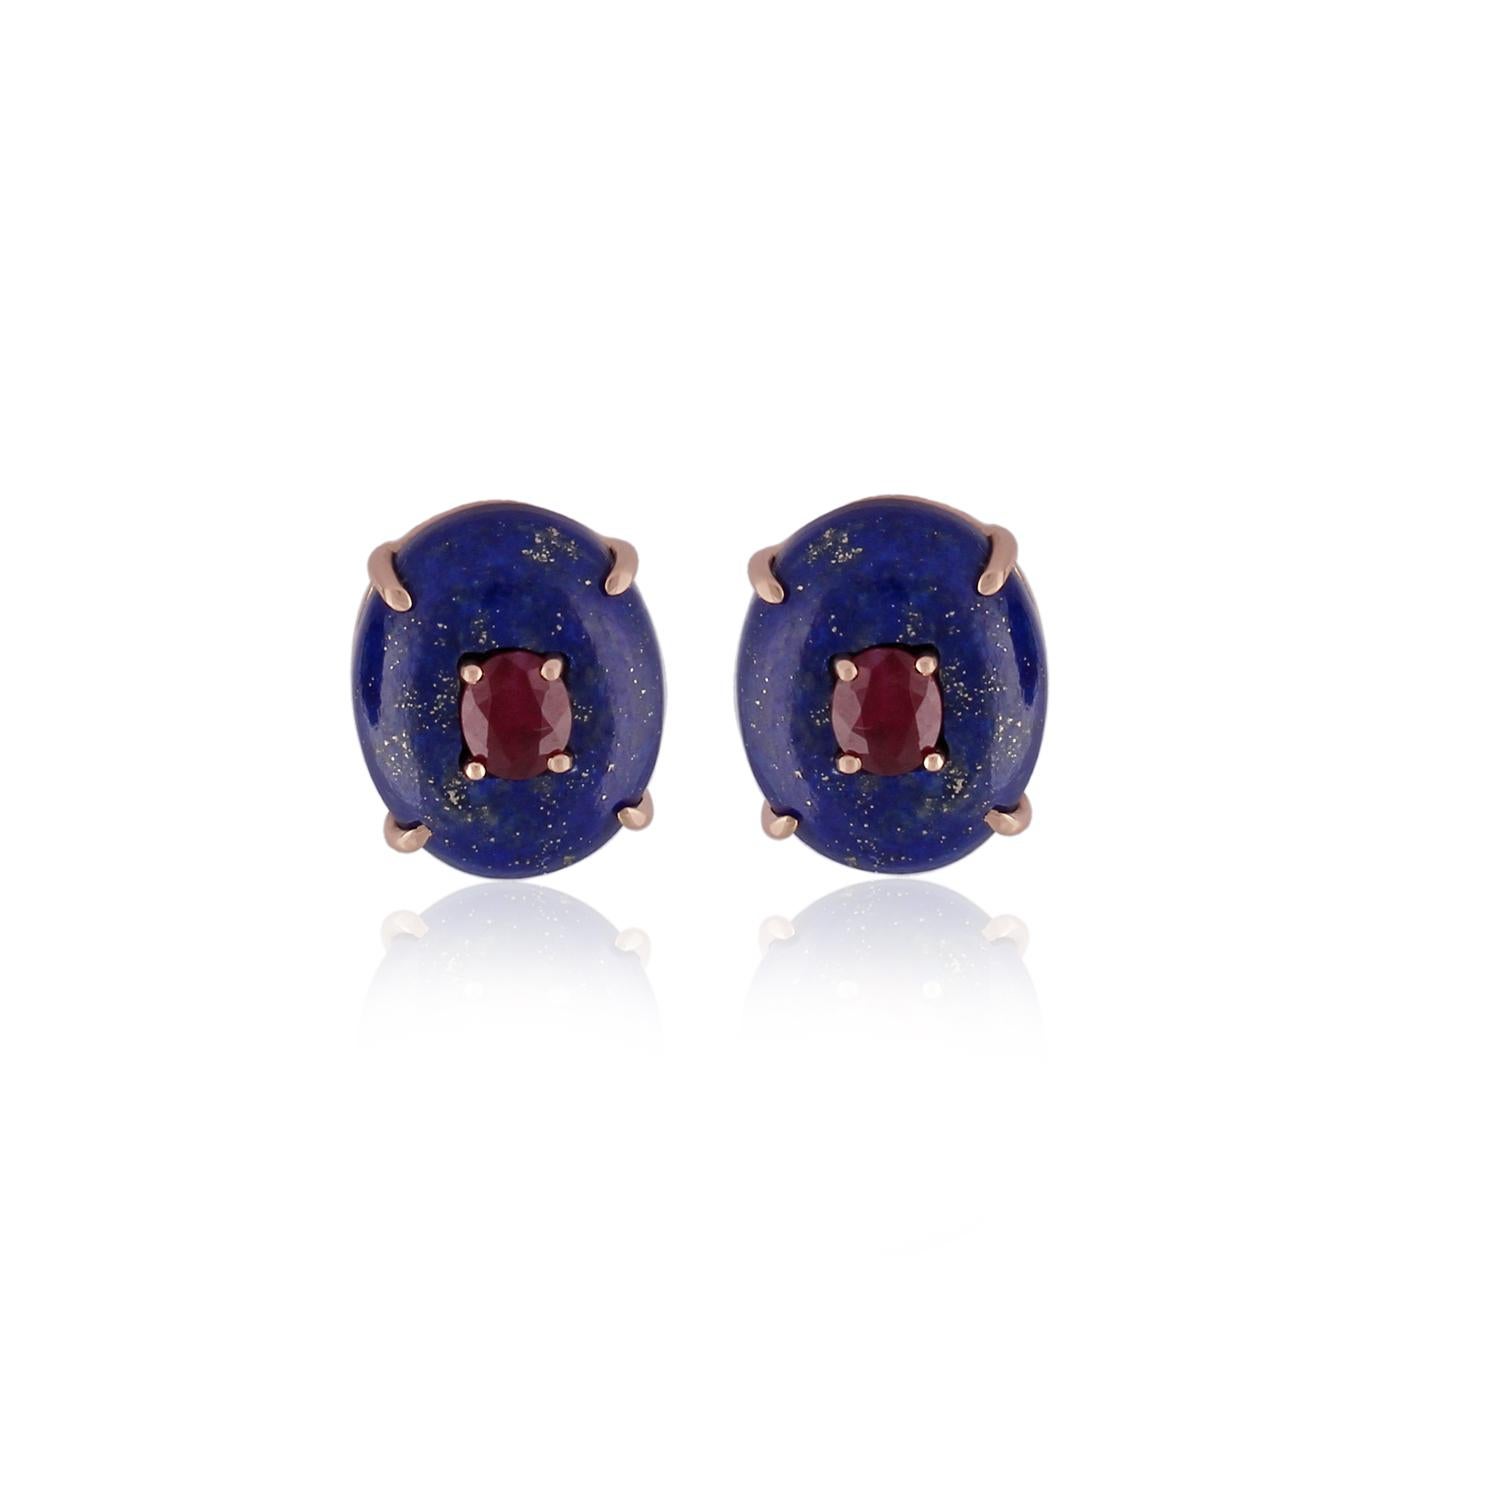 Art Deco style Stud earrings, natural lapis lazuli buttons with 2 small Oval cut Ruby in the center Set in 18k Gold.
 
Gold    -   3.13gm
lapis lazuli    -    10.70 Carat
Ruby      -       1.08 Carat

